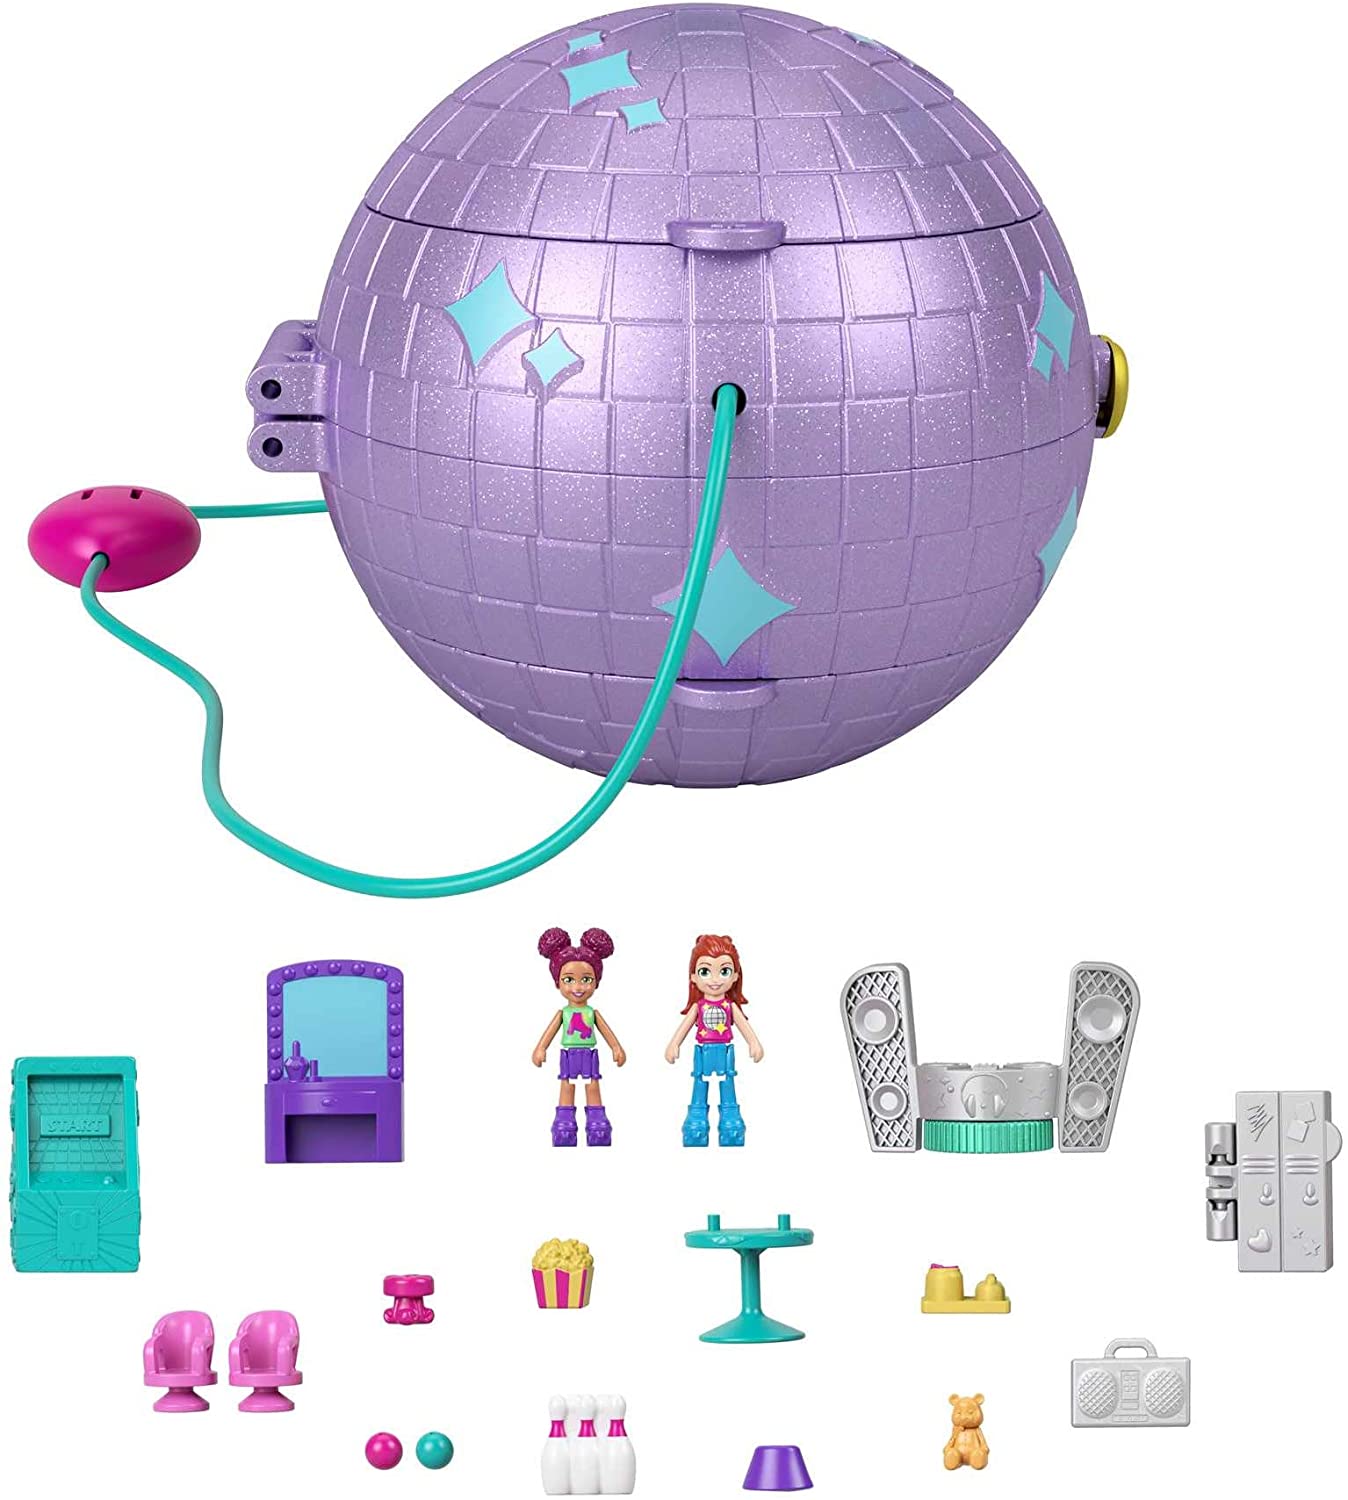 Polly Pocket Playset, Travel Toy with 2 Micro Dolls & Water Play  Accessories, Pocket World Sweet Sails Cruise Ship Compact